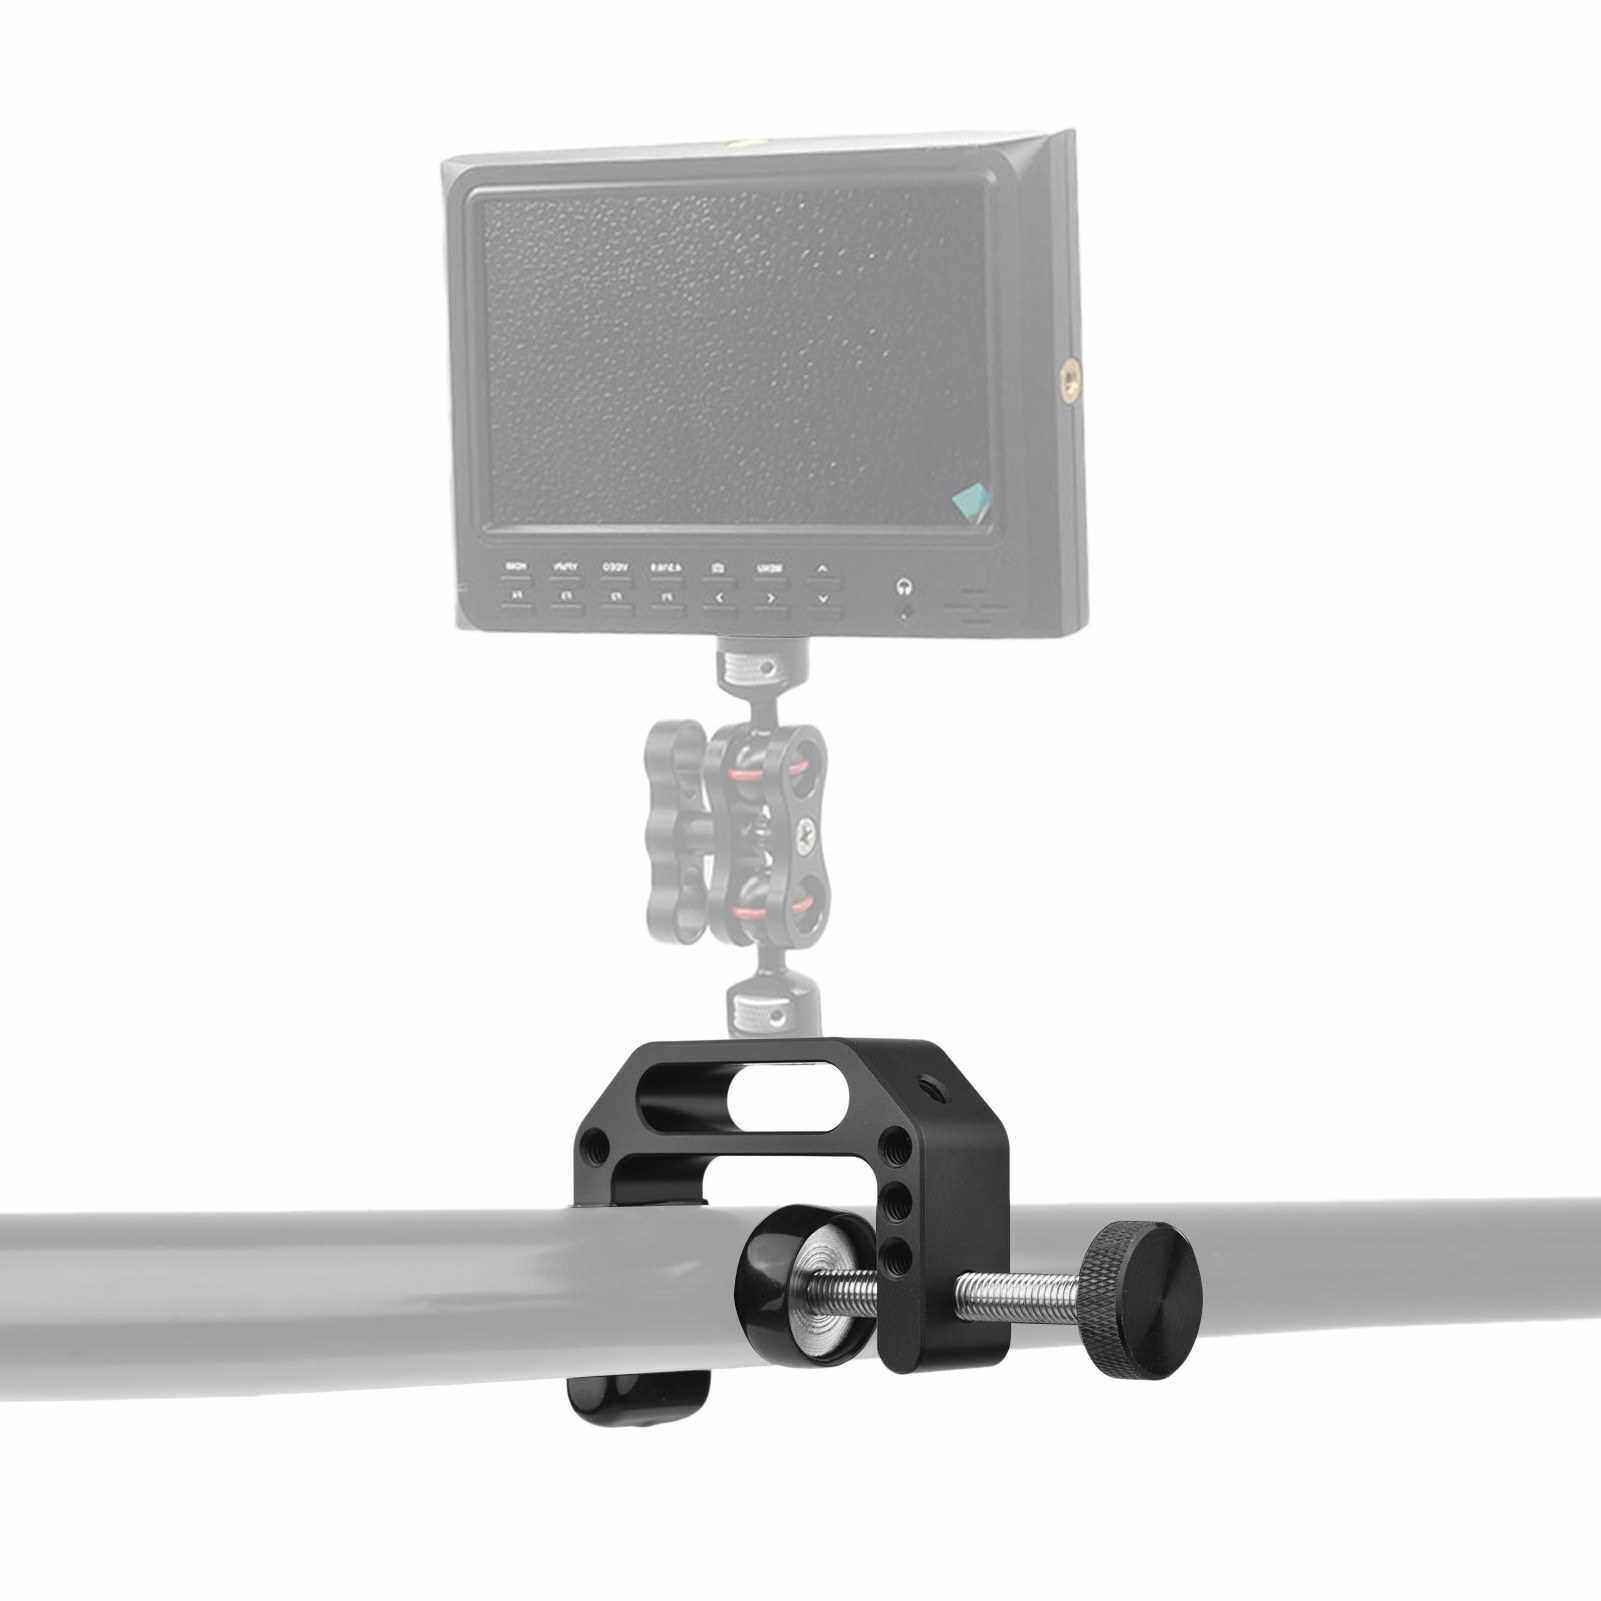 Universal C Clamp Heavy Duty Desktop Mount Clamp Tripod Light Stand Clamp with Standard 1/4 Inch & 3/8 Inch Screw Holes for Mounting Video Monitor Flash Speedlite Microphone (Standard)